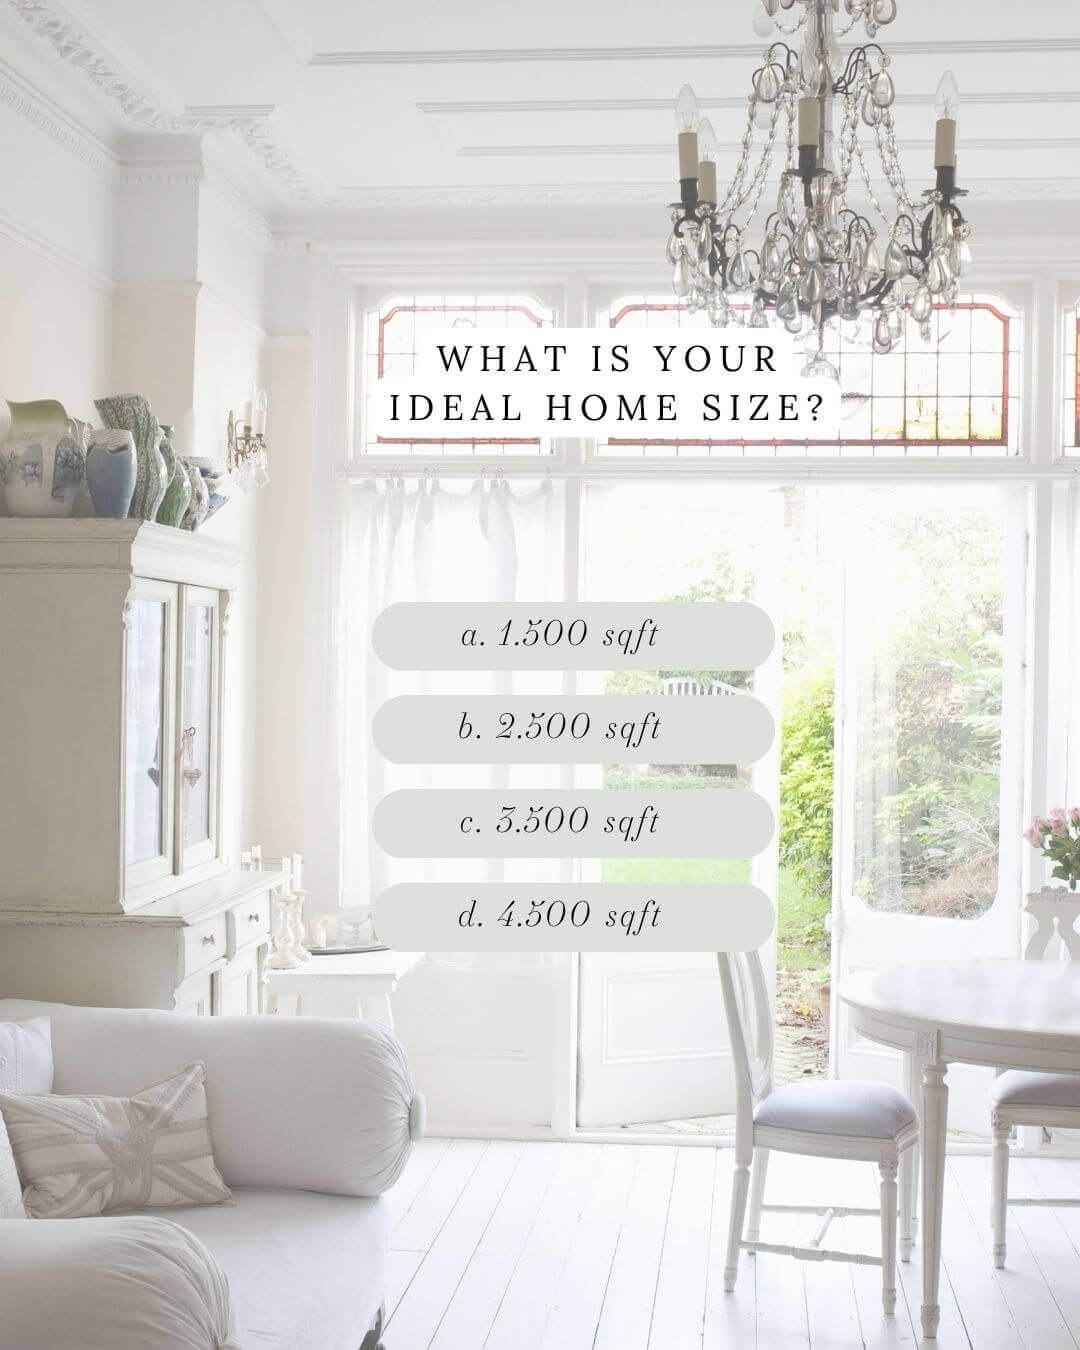 social media template ideal home size question